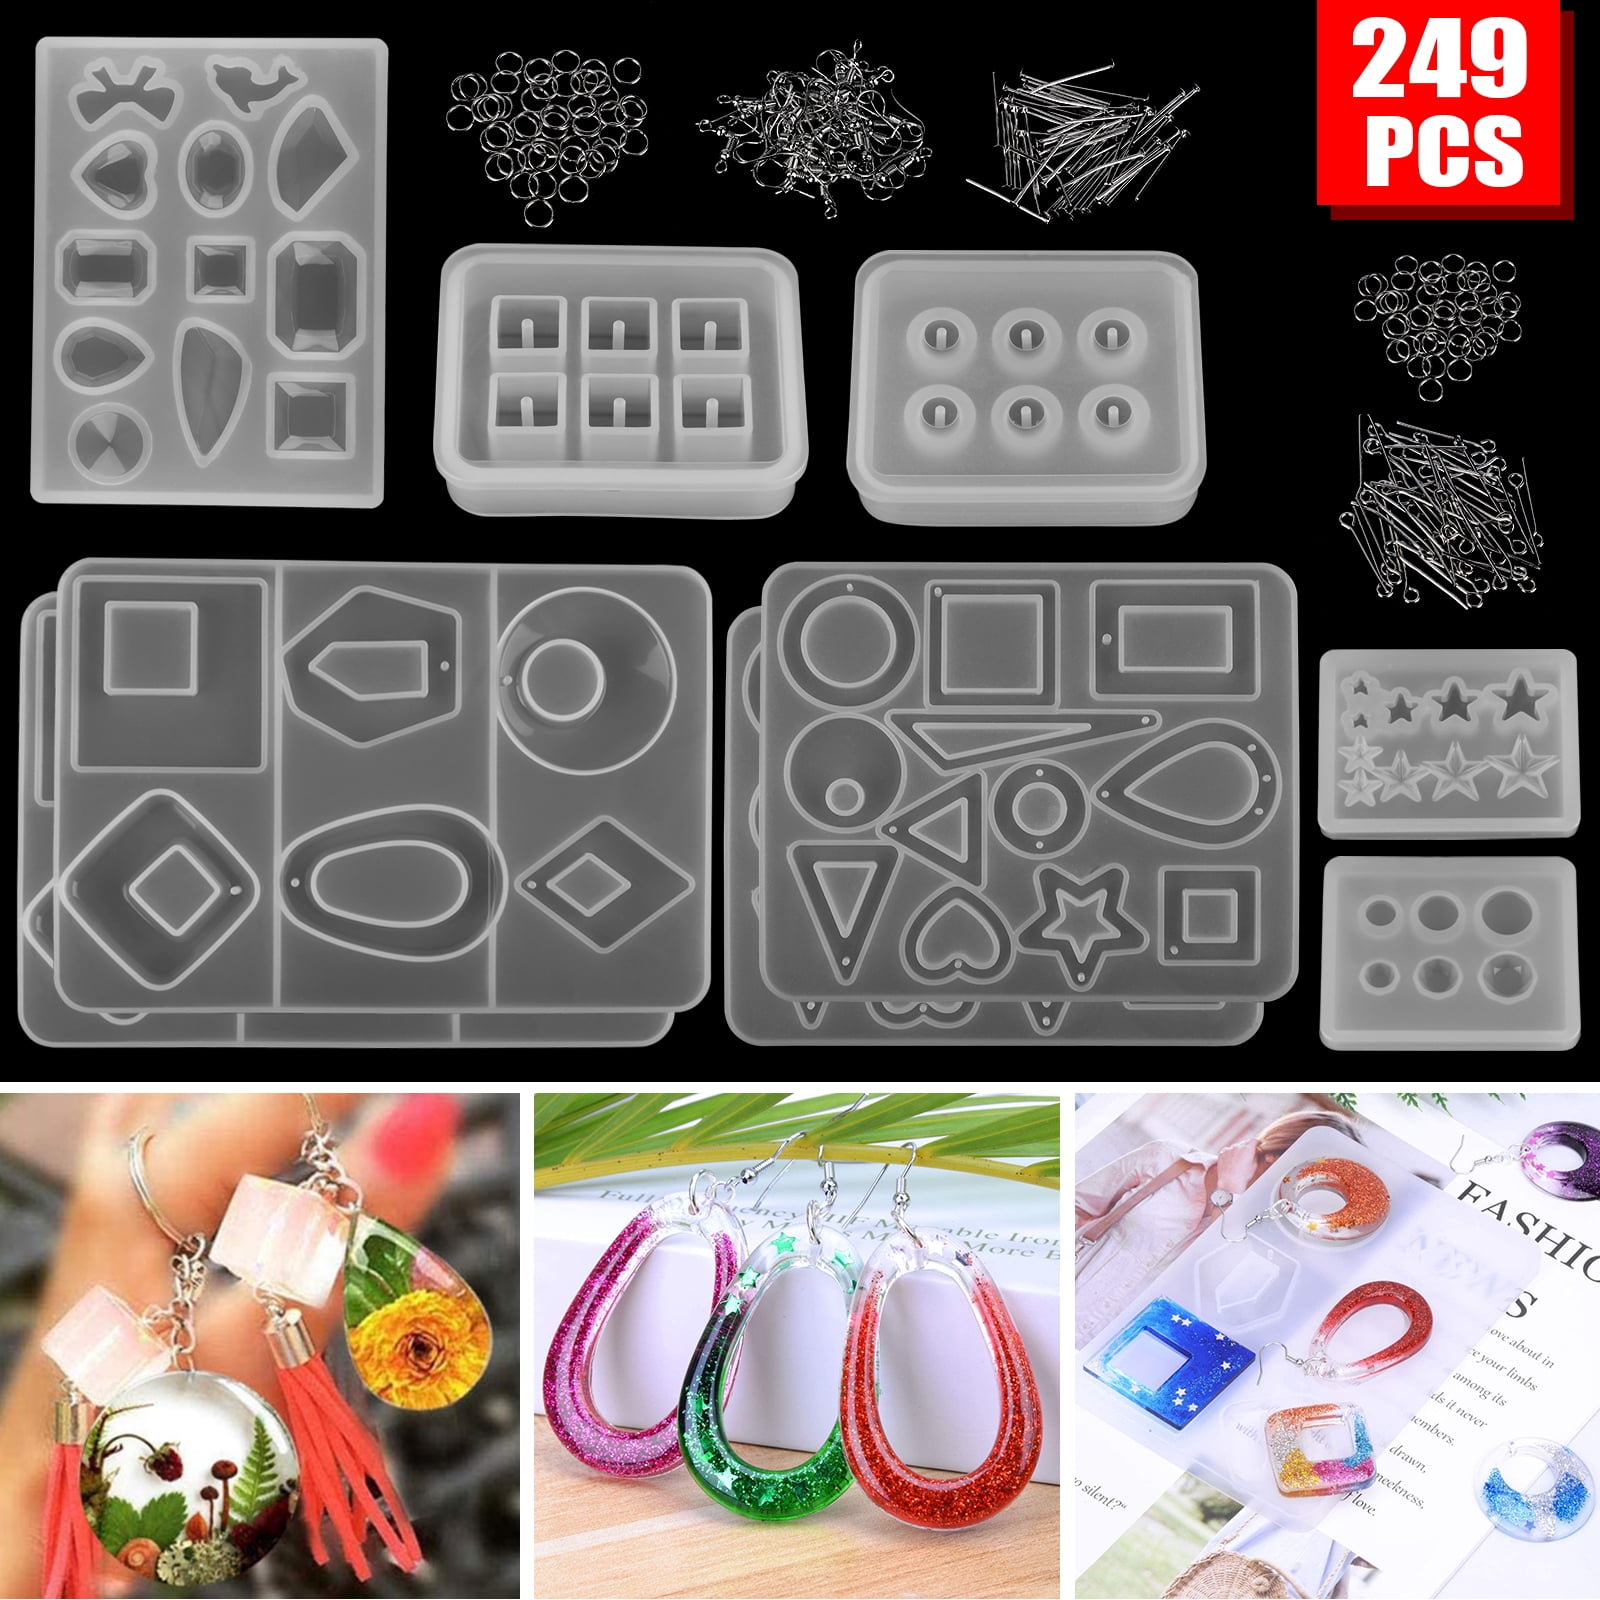 goneryisour Resin Casting Mold Kit DIY Jewelry Craft Moulds Silicone Epoxy Resin Mold Tools Set